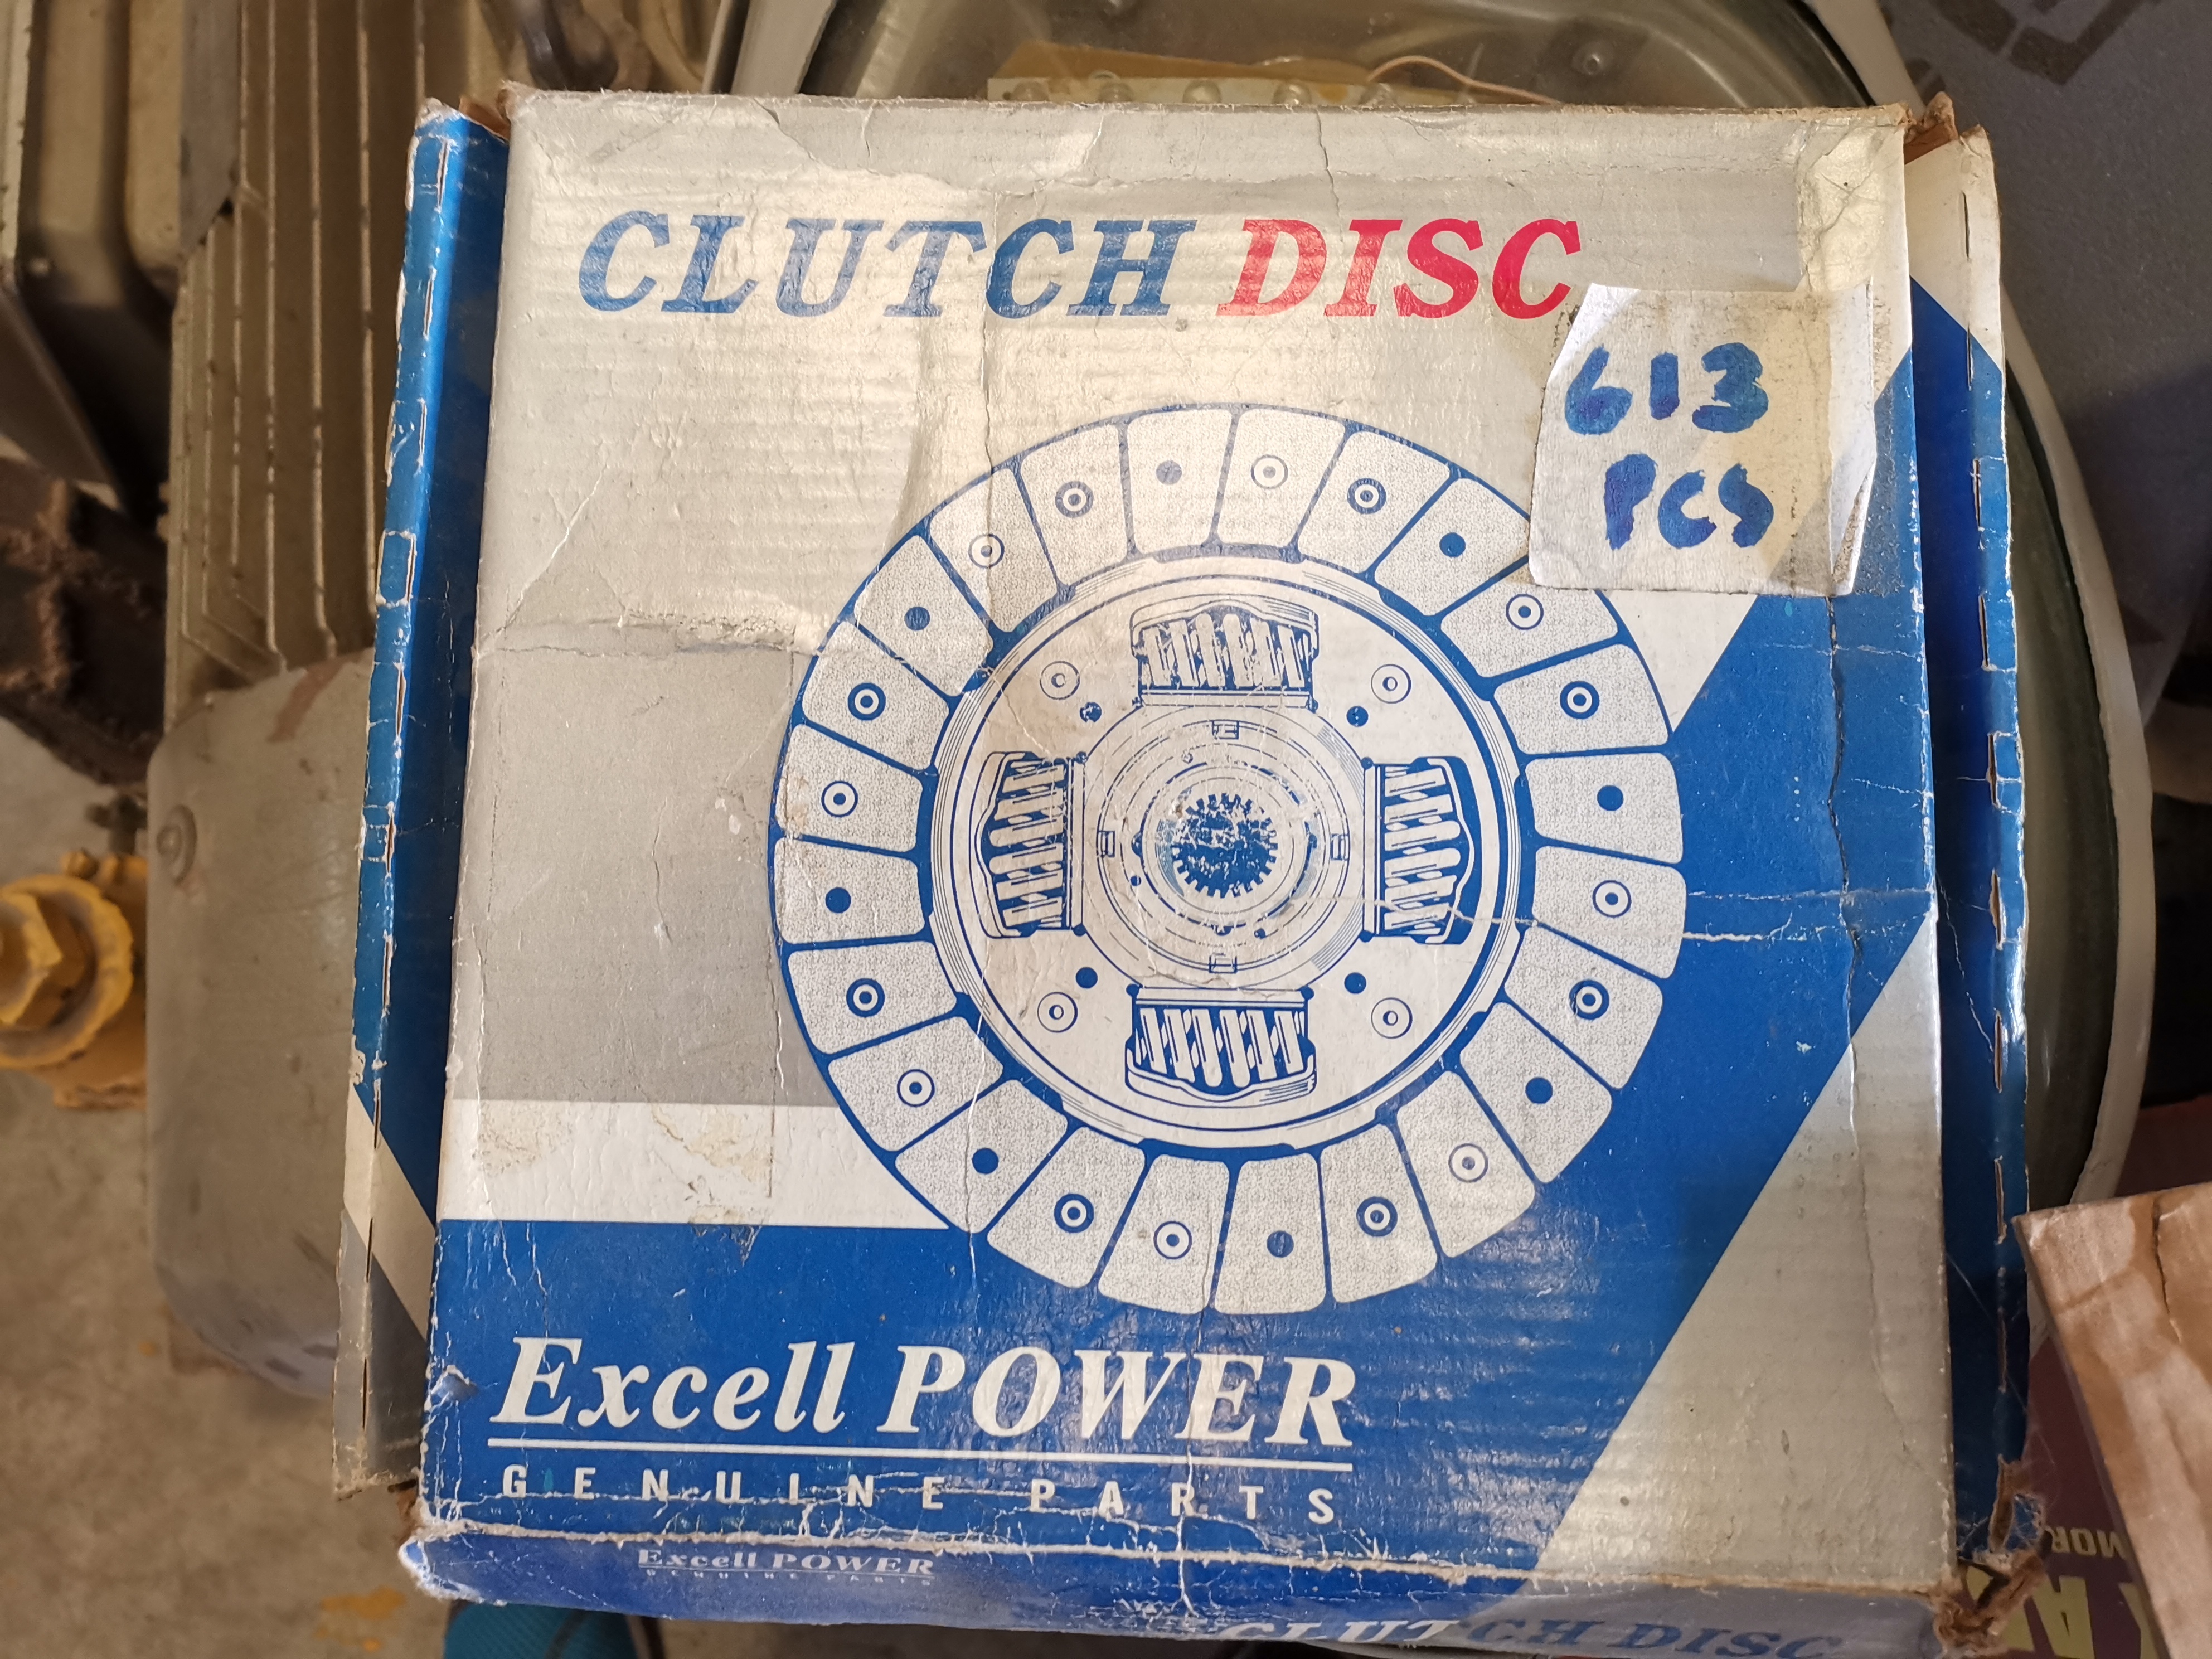 Excell power car clutch disc